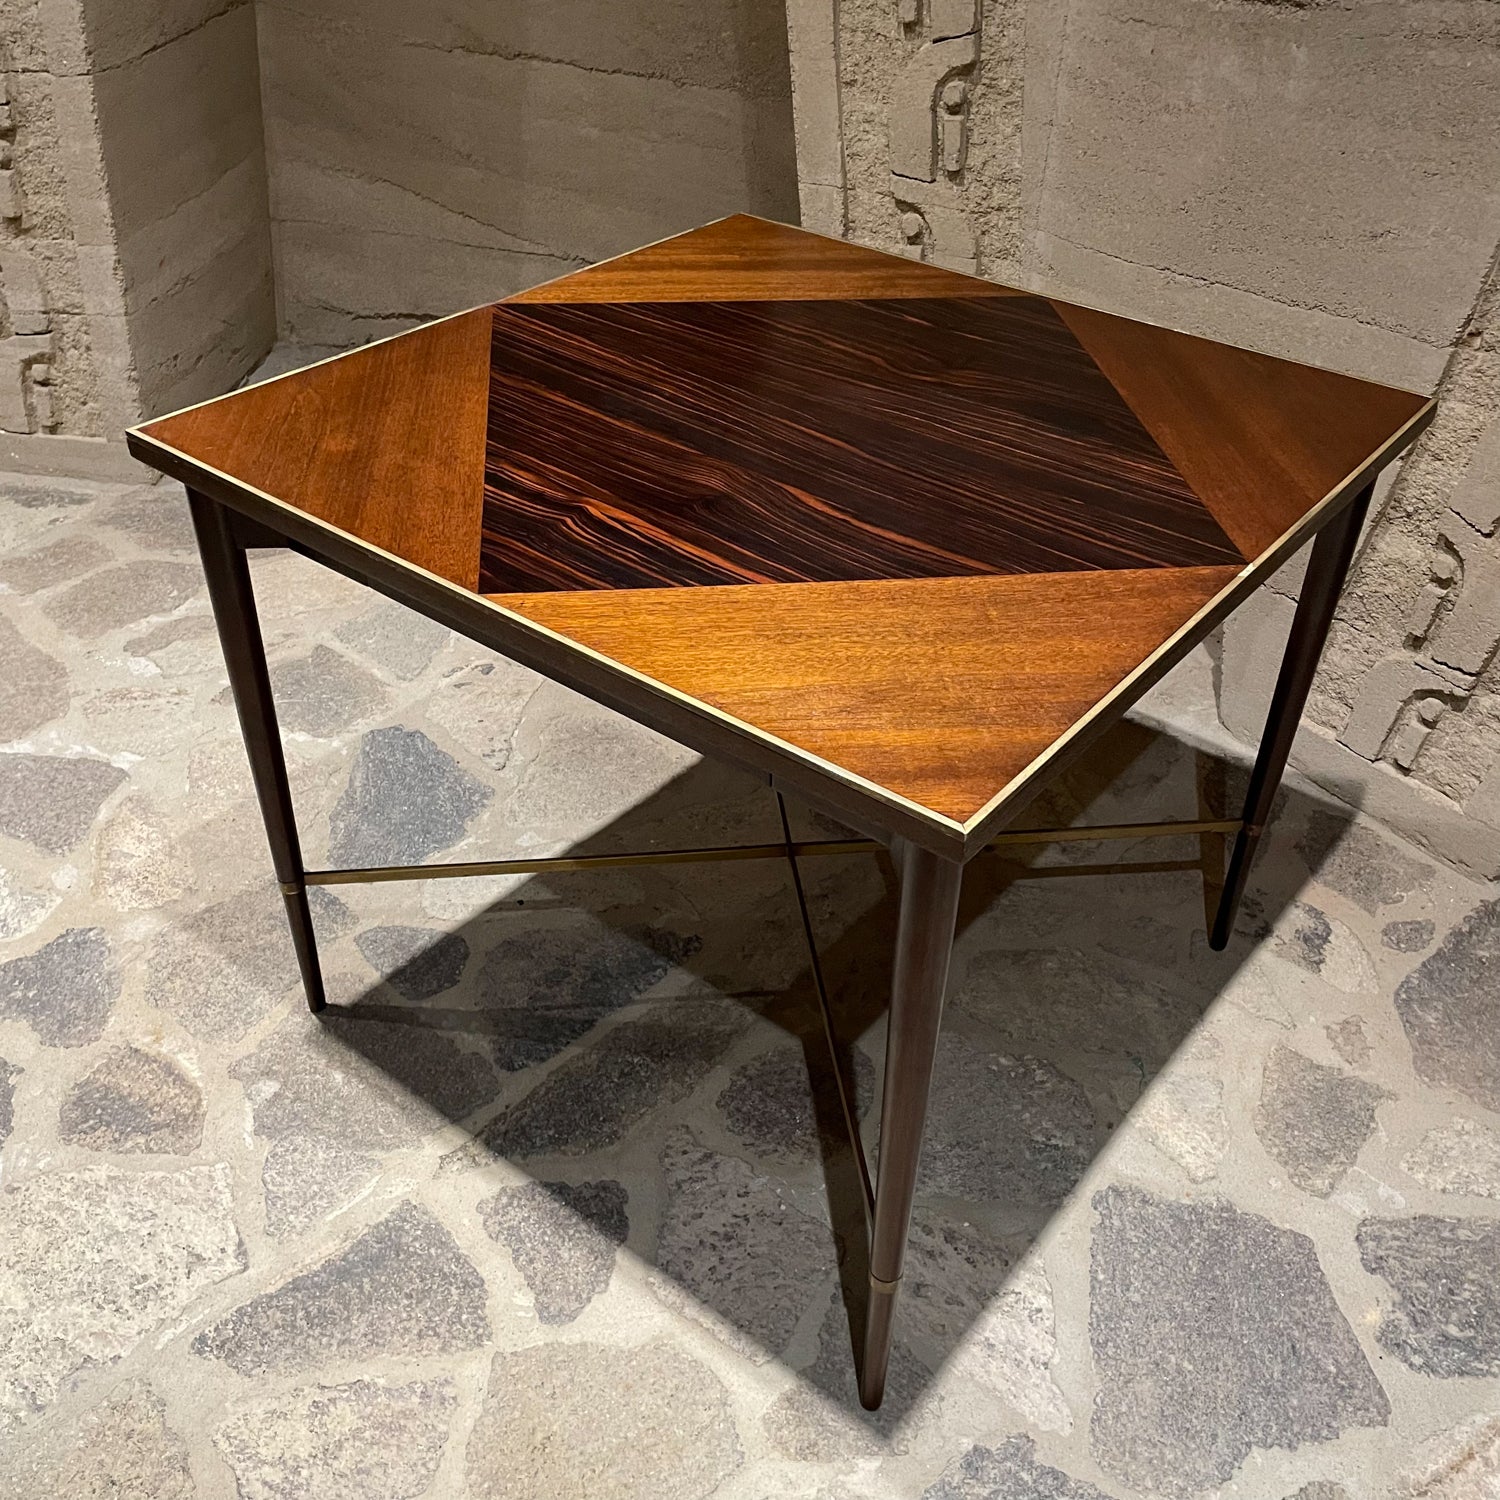 Paul Mccobb side table
1950s Paul McCobb diamond side table Connoisseur Collection for H Sacks & Sons of Brookline, MA.
Mahogany Rosewood & Brass Side table with a drawer.
This exquisite table designed by Paul McCobb; mahogany wood with rosewood